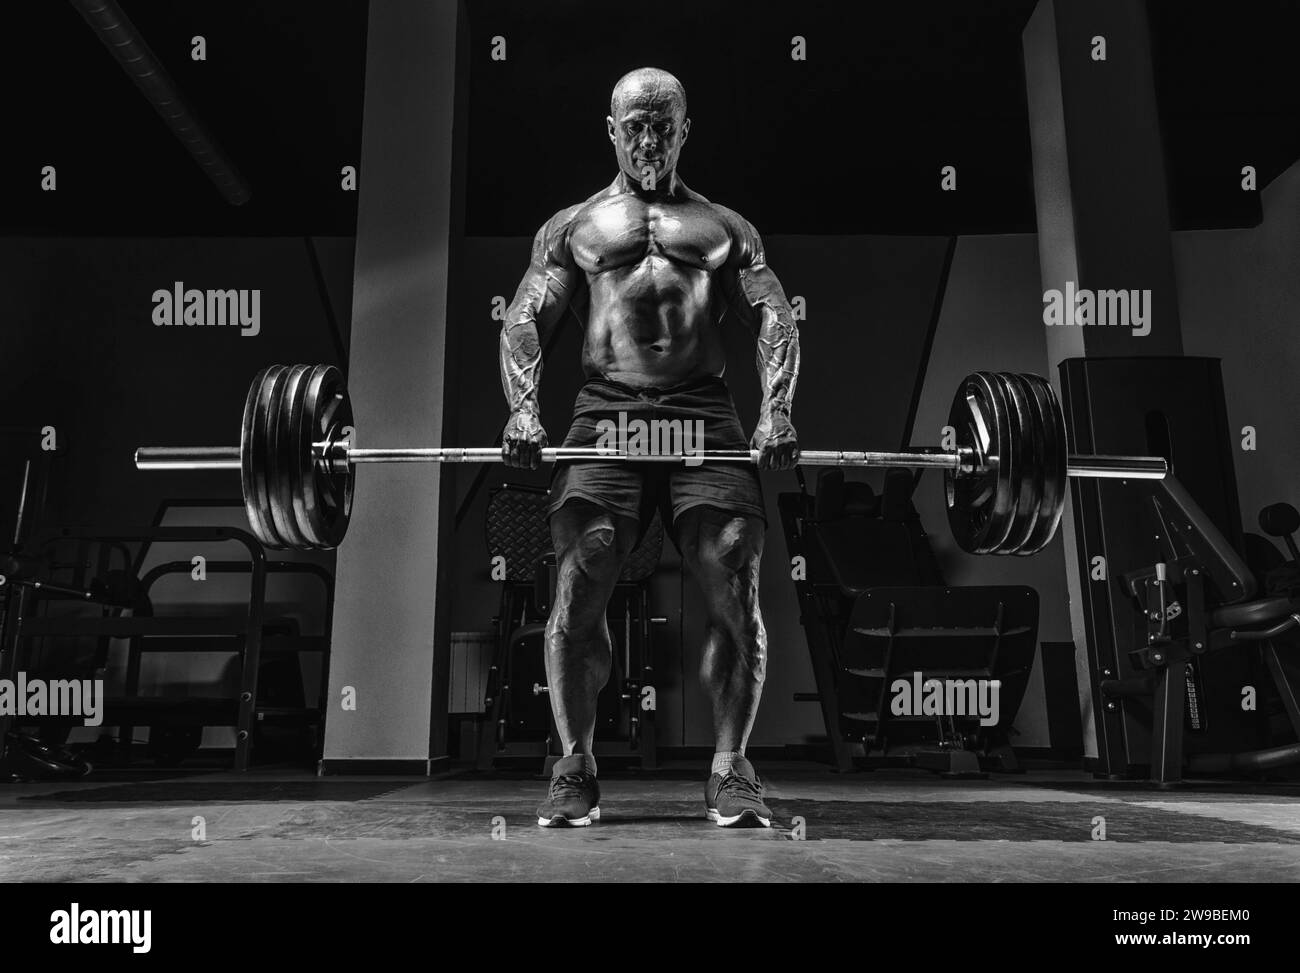 Muscular man stands with a barbell in his hands. Deadlift. Bodybuilding concept. Mixed media Stock Photo